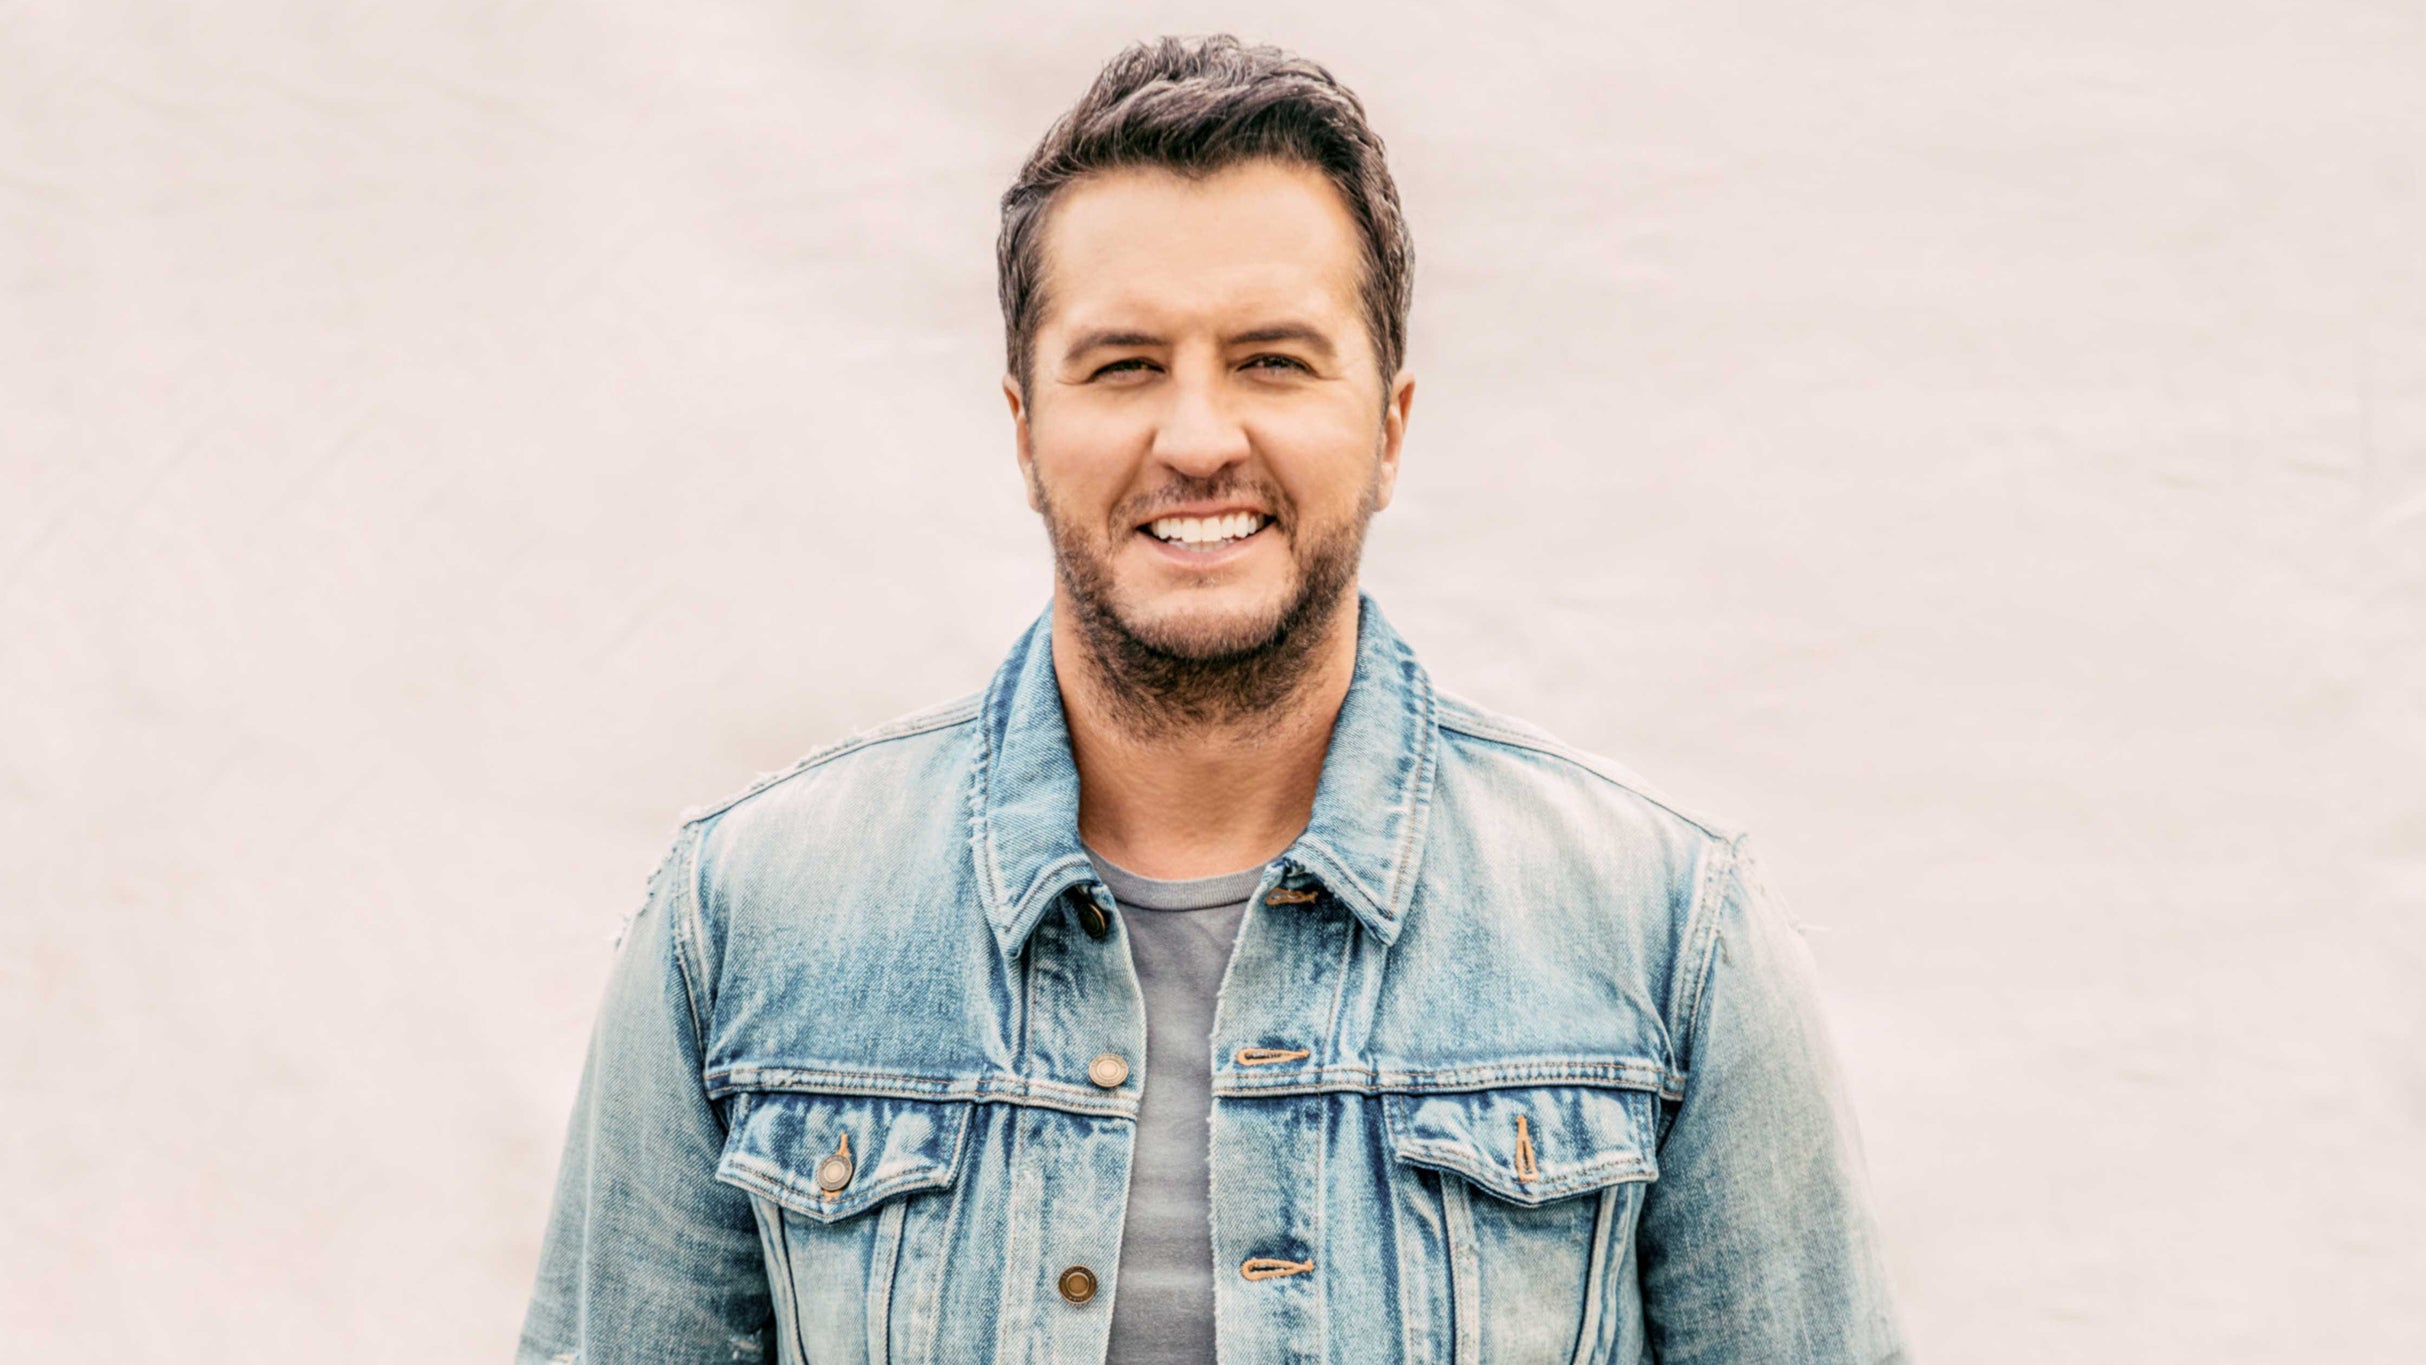 Luke Bryan: Country On Tour 2023 free presale code for concert tickets in Saint Paul, MN (Xcel Energy Center)